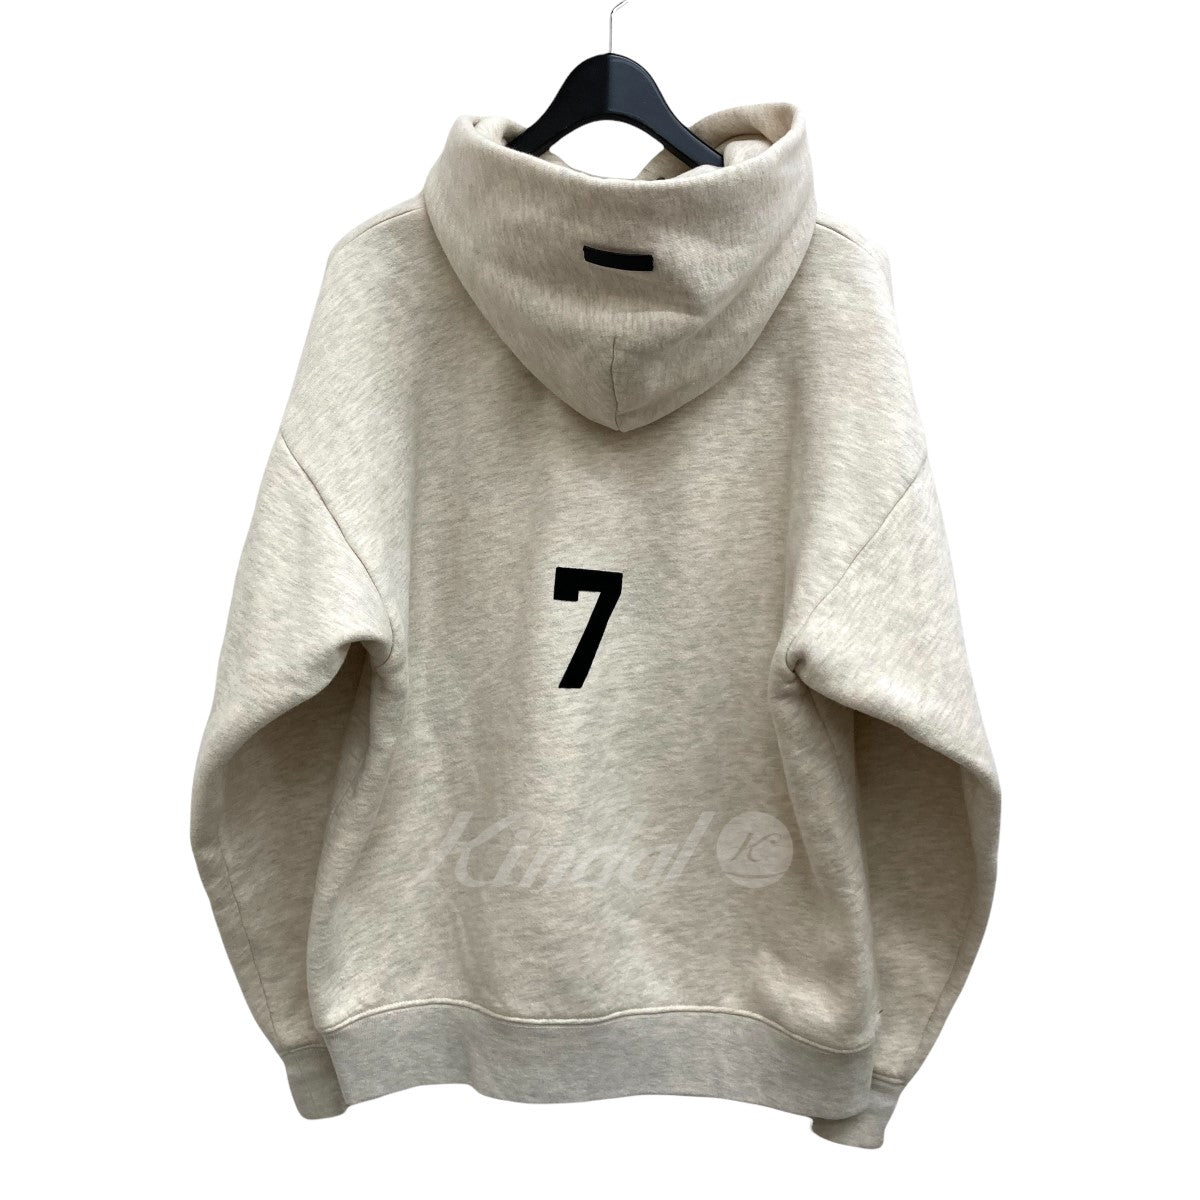 FEAR OF GOD(フィアオブゴッド) SEVENTH COLLECTION ABC HOODIE パーカー